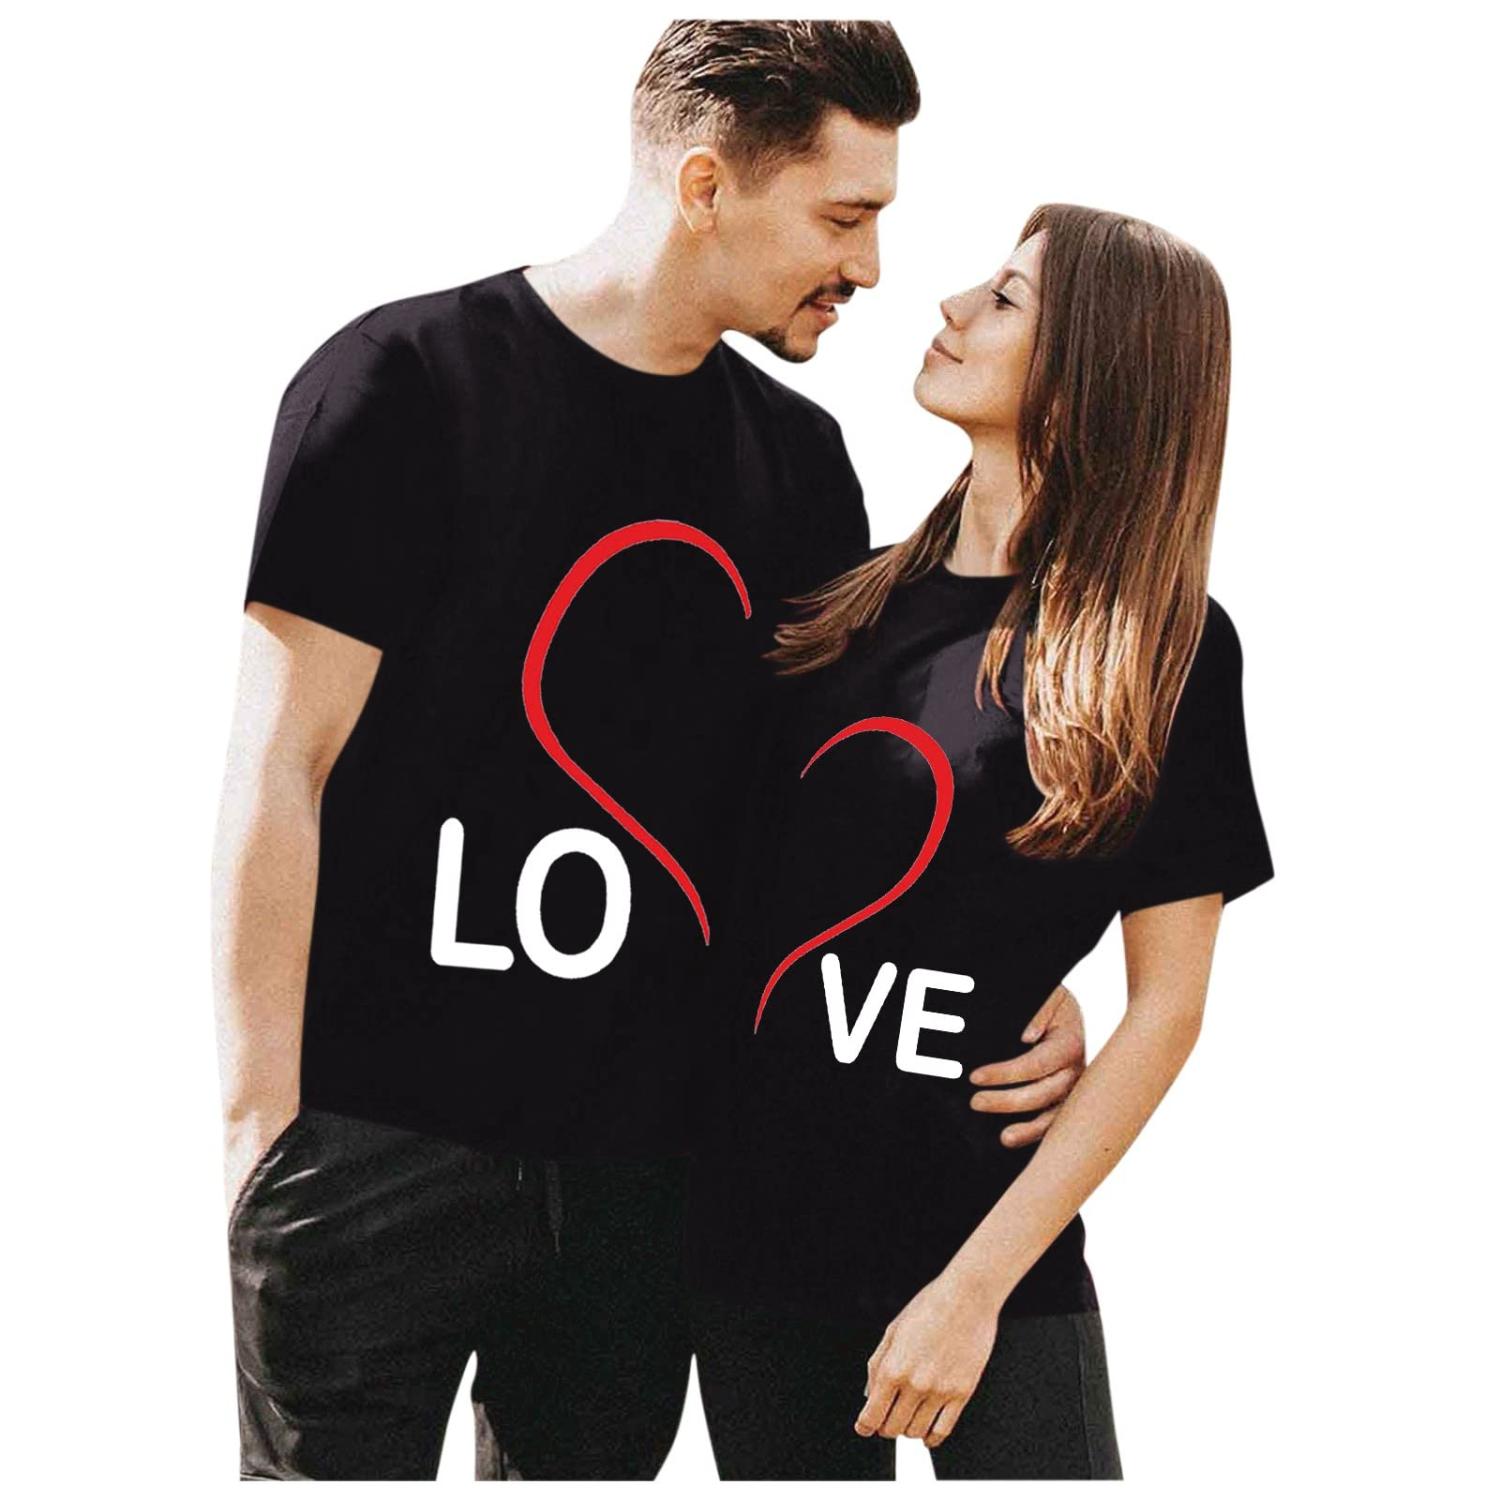 Xlnuln Matching Shirts for Couples Couple Matching Tees Shirt for